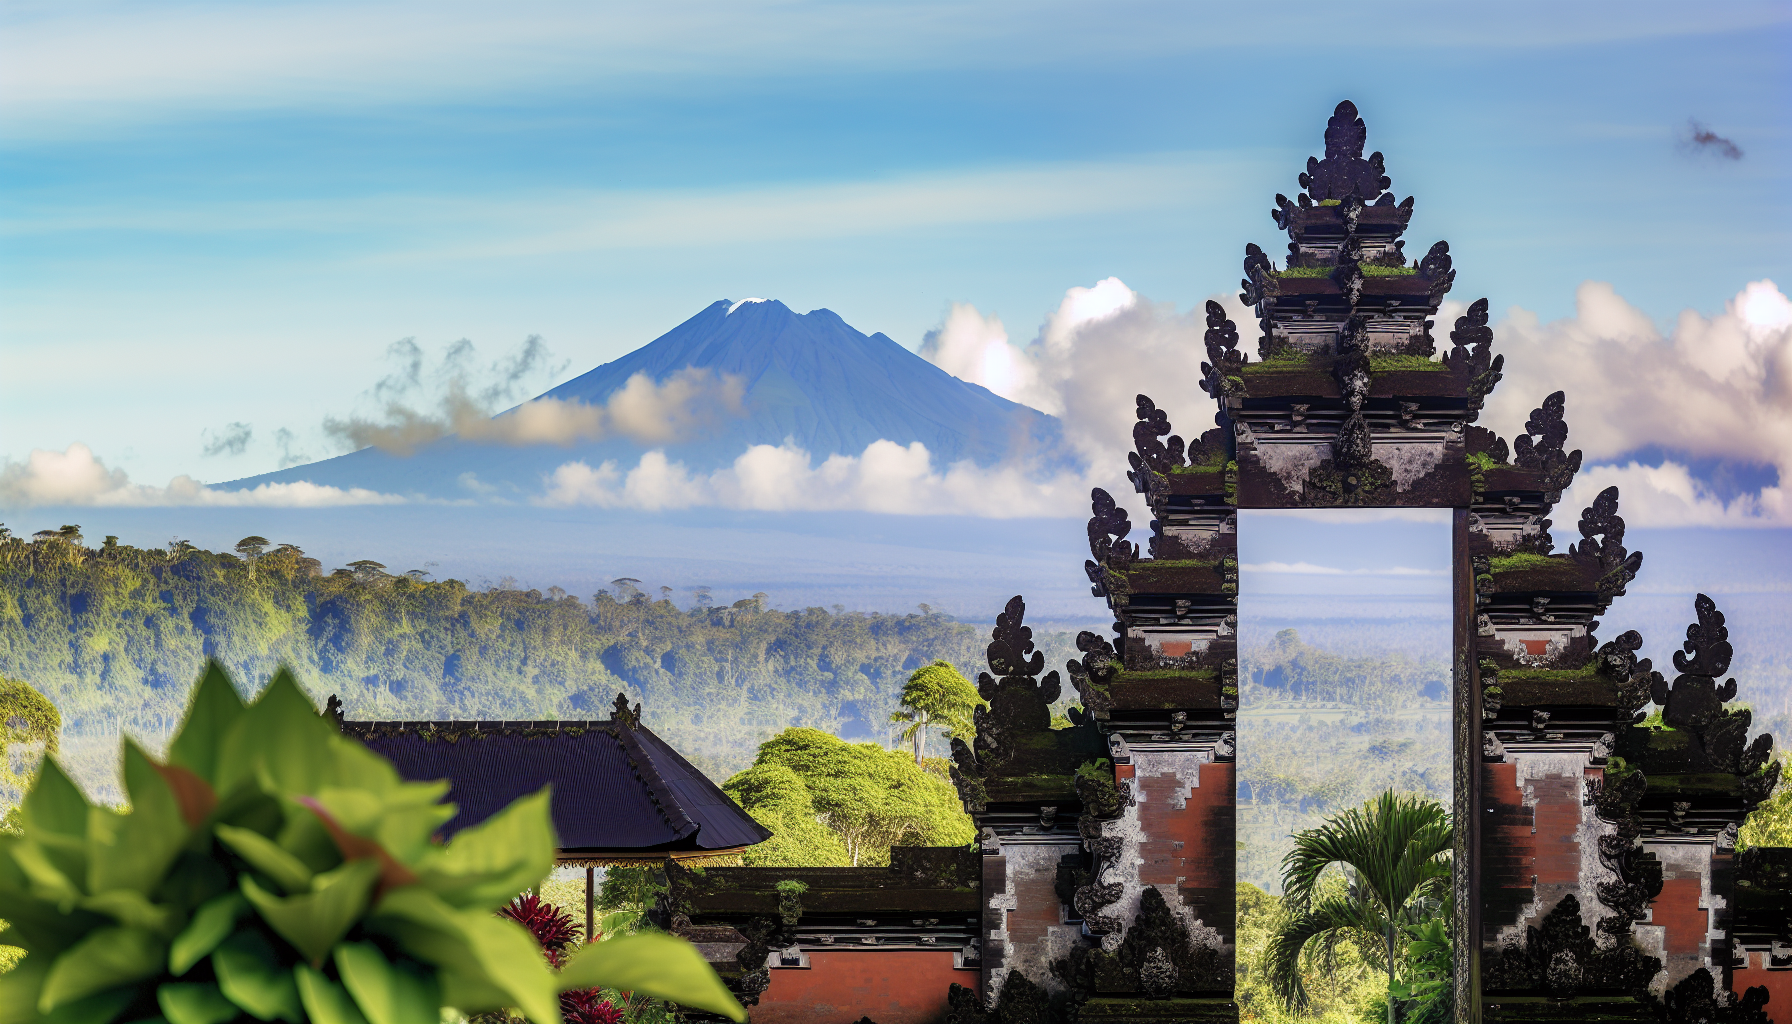 Pura Lempuyang temple with a view of Mount Agung